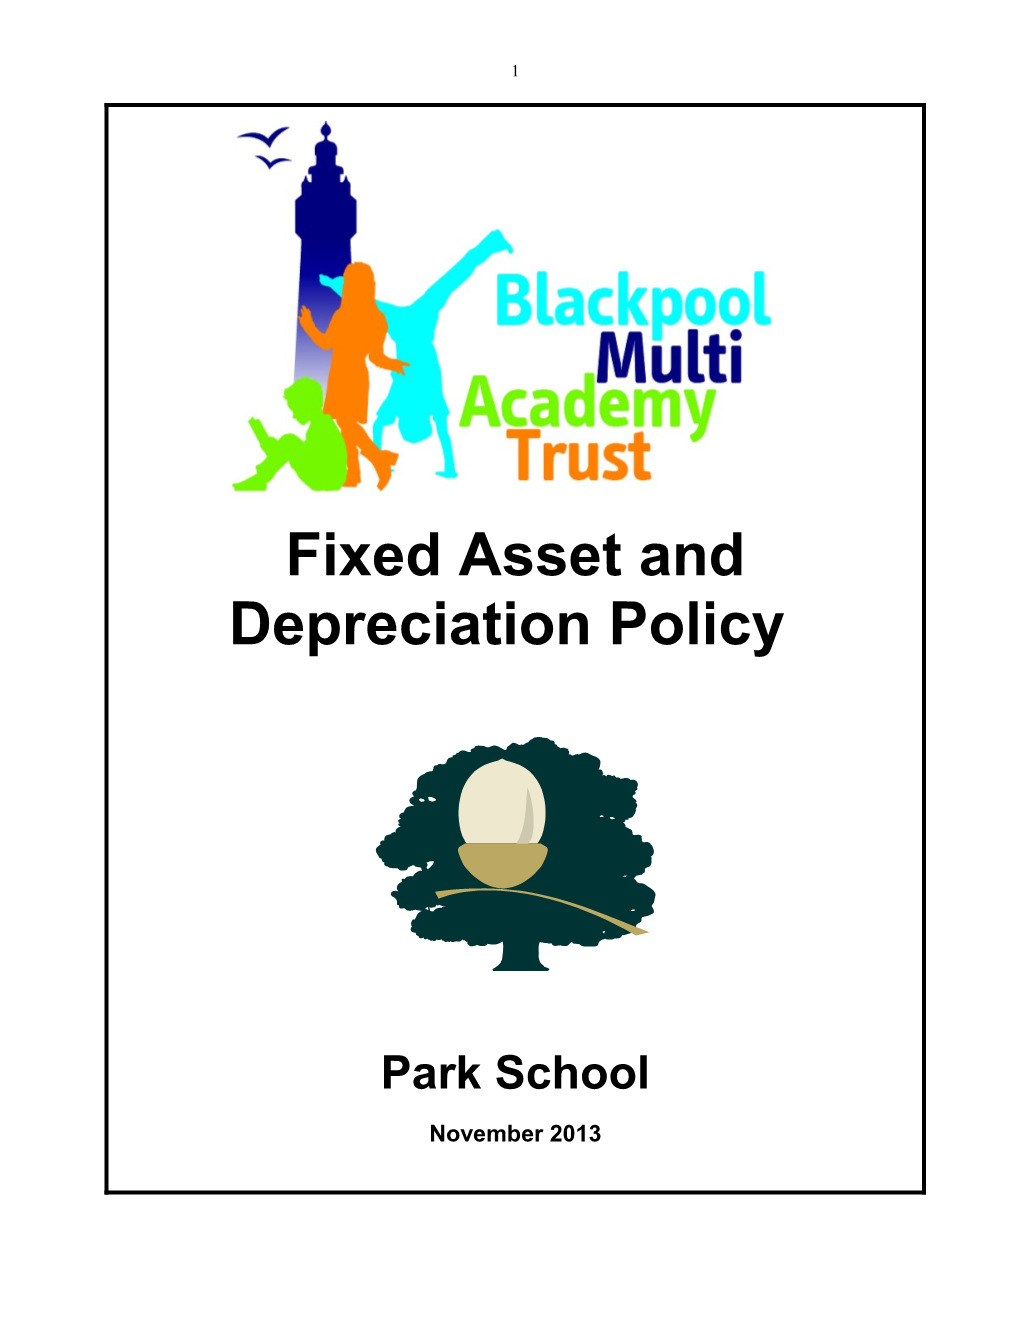 Fixed Asset and Depreciation Policy